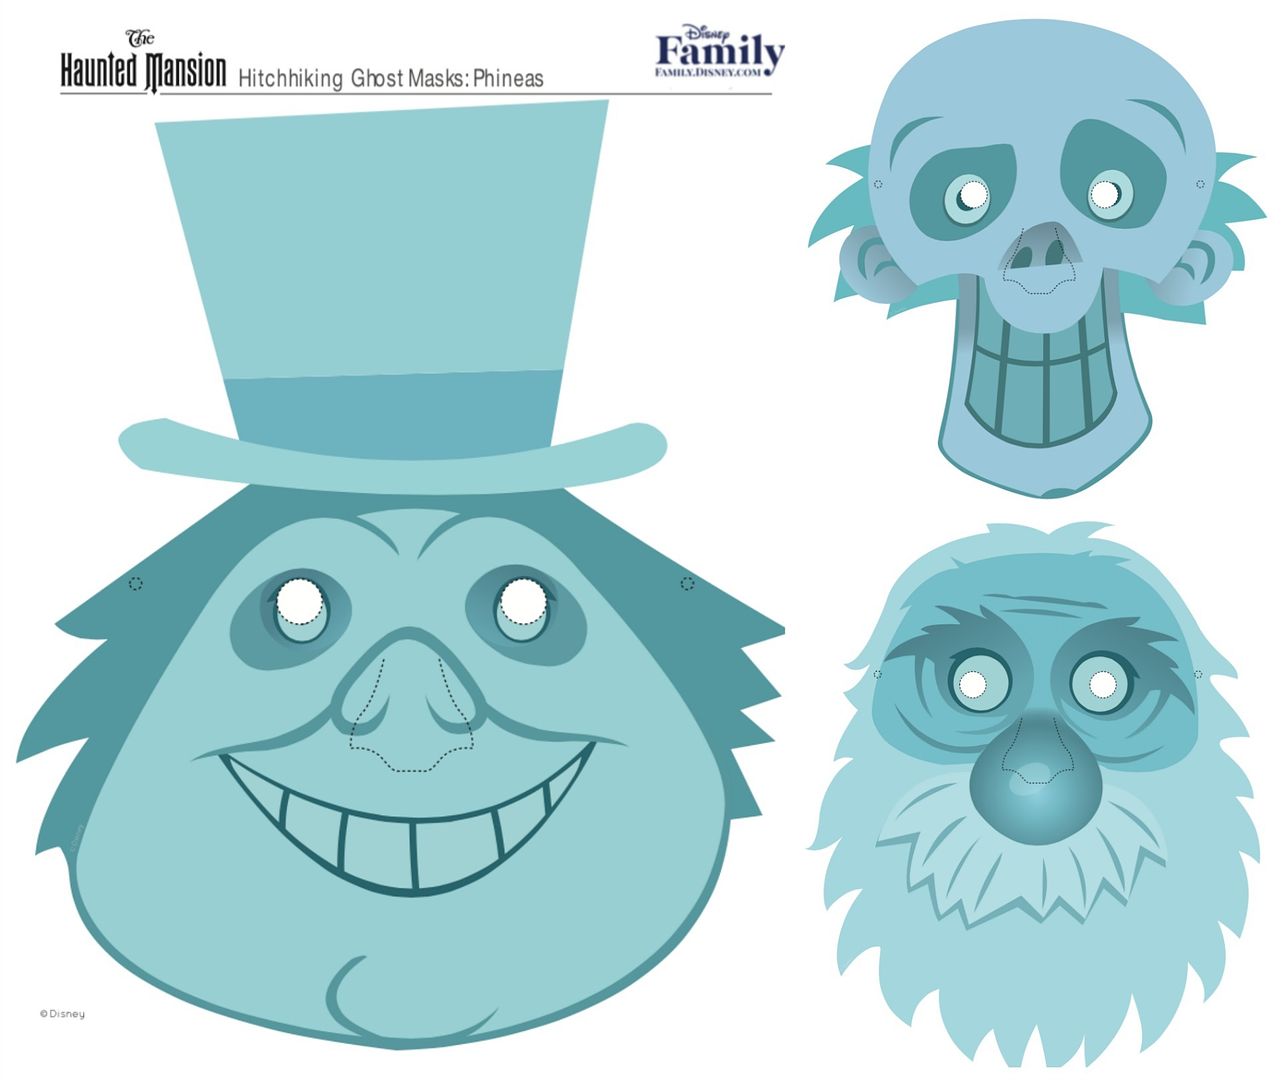 Free printable Halloween masks: The Disney Haunted Mansion hitchhiking ghosts. How cool!